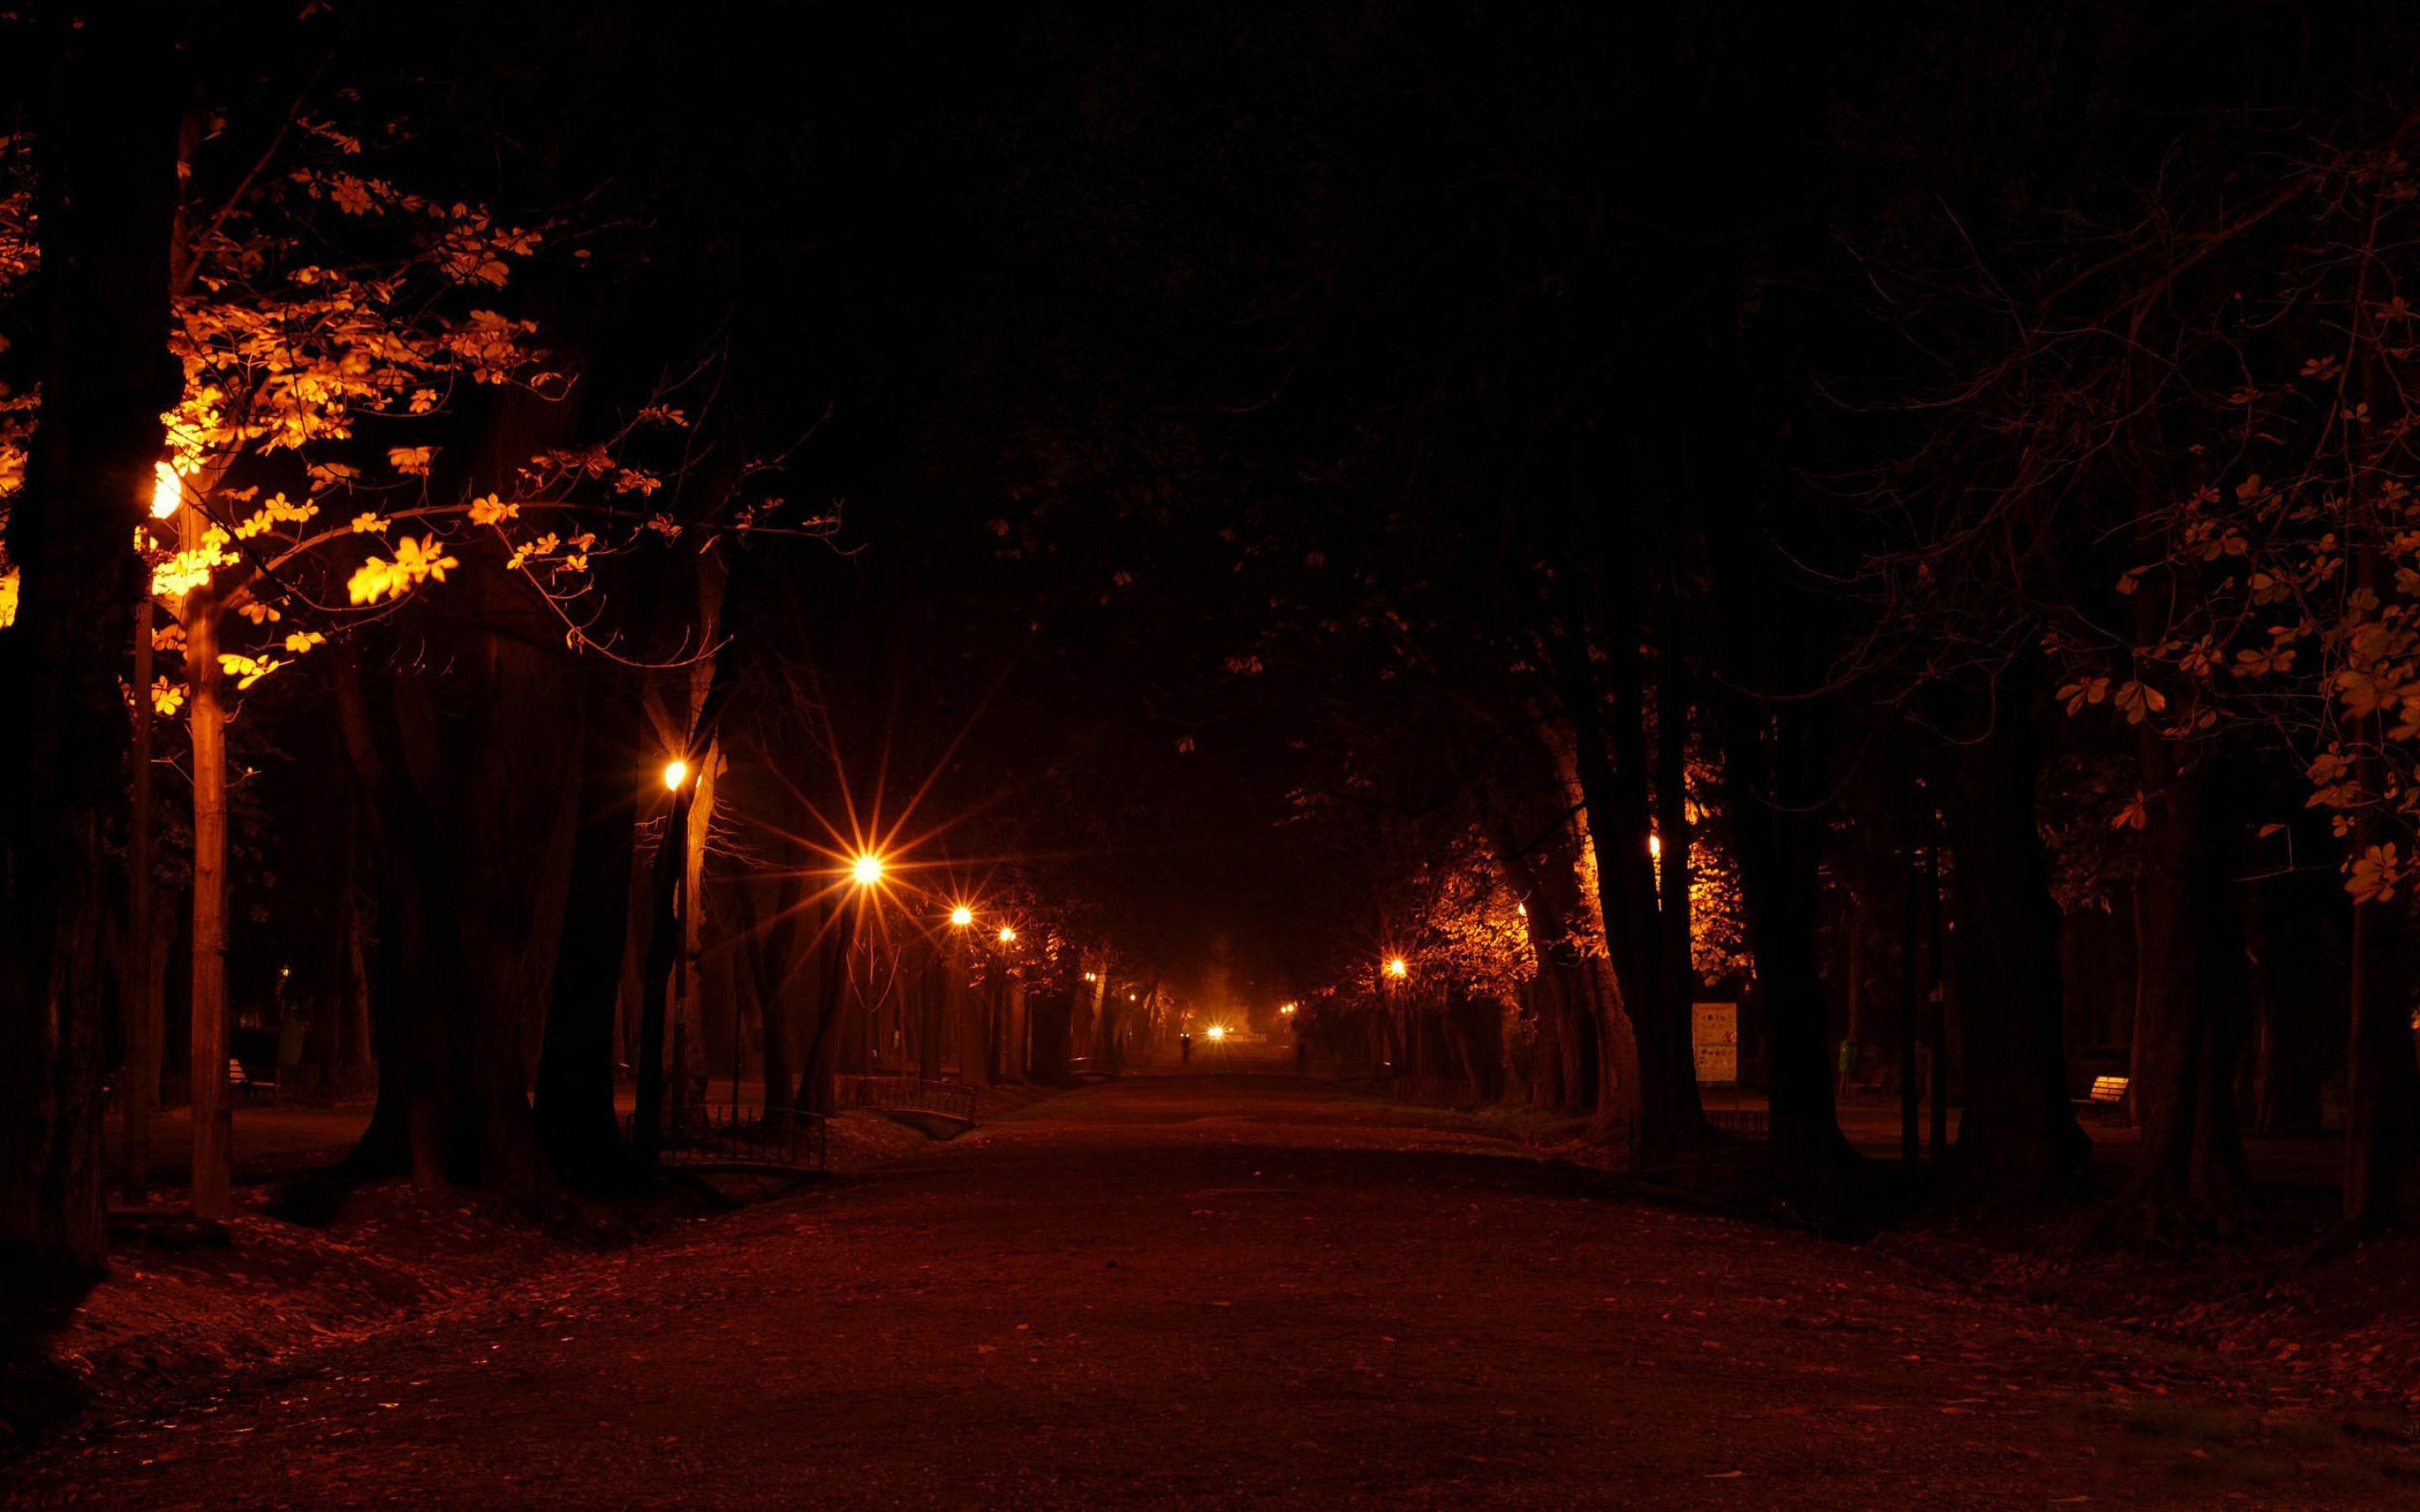 Night in the Park wallpaper and image